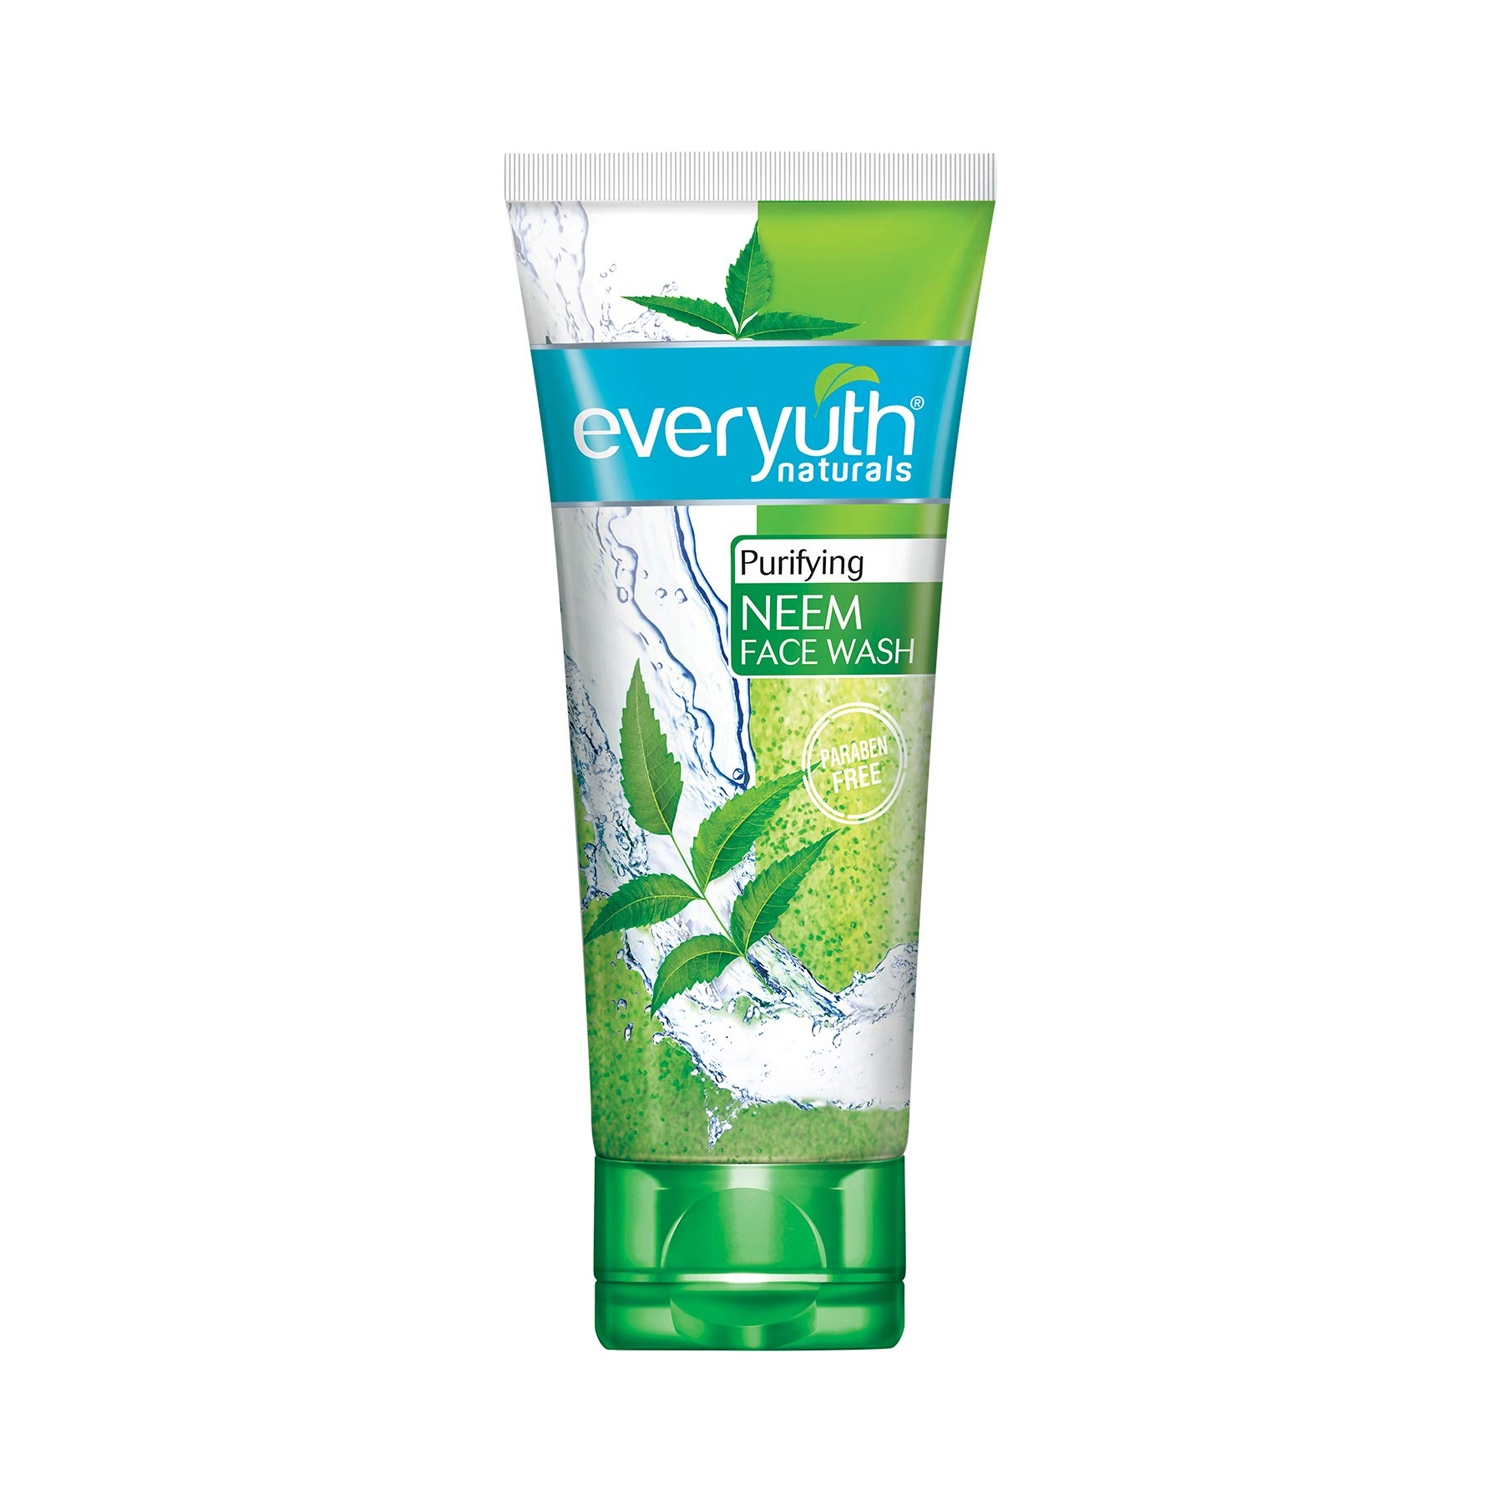 Everyuth Naturals | Everyuth Naturals Purifying Neem Face Wash (150g)